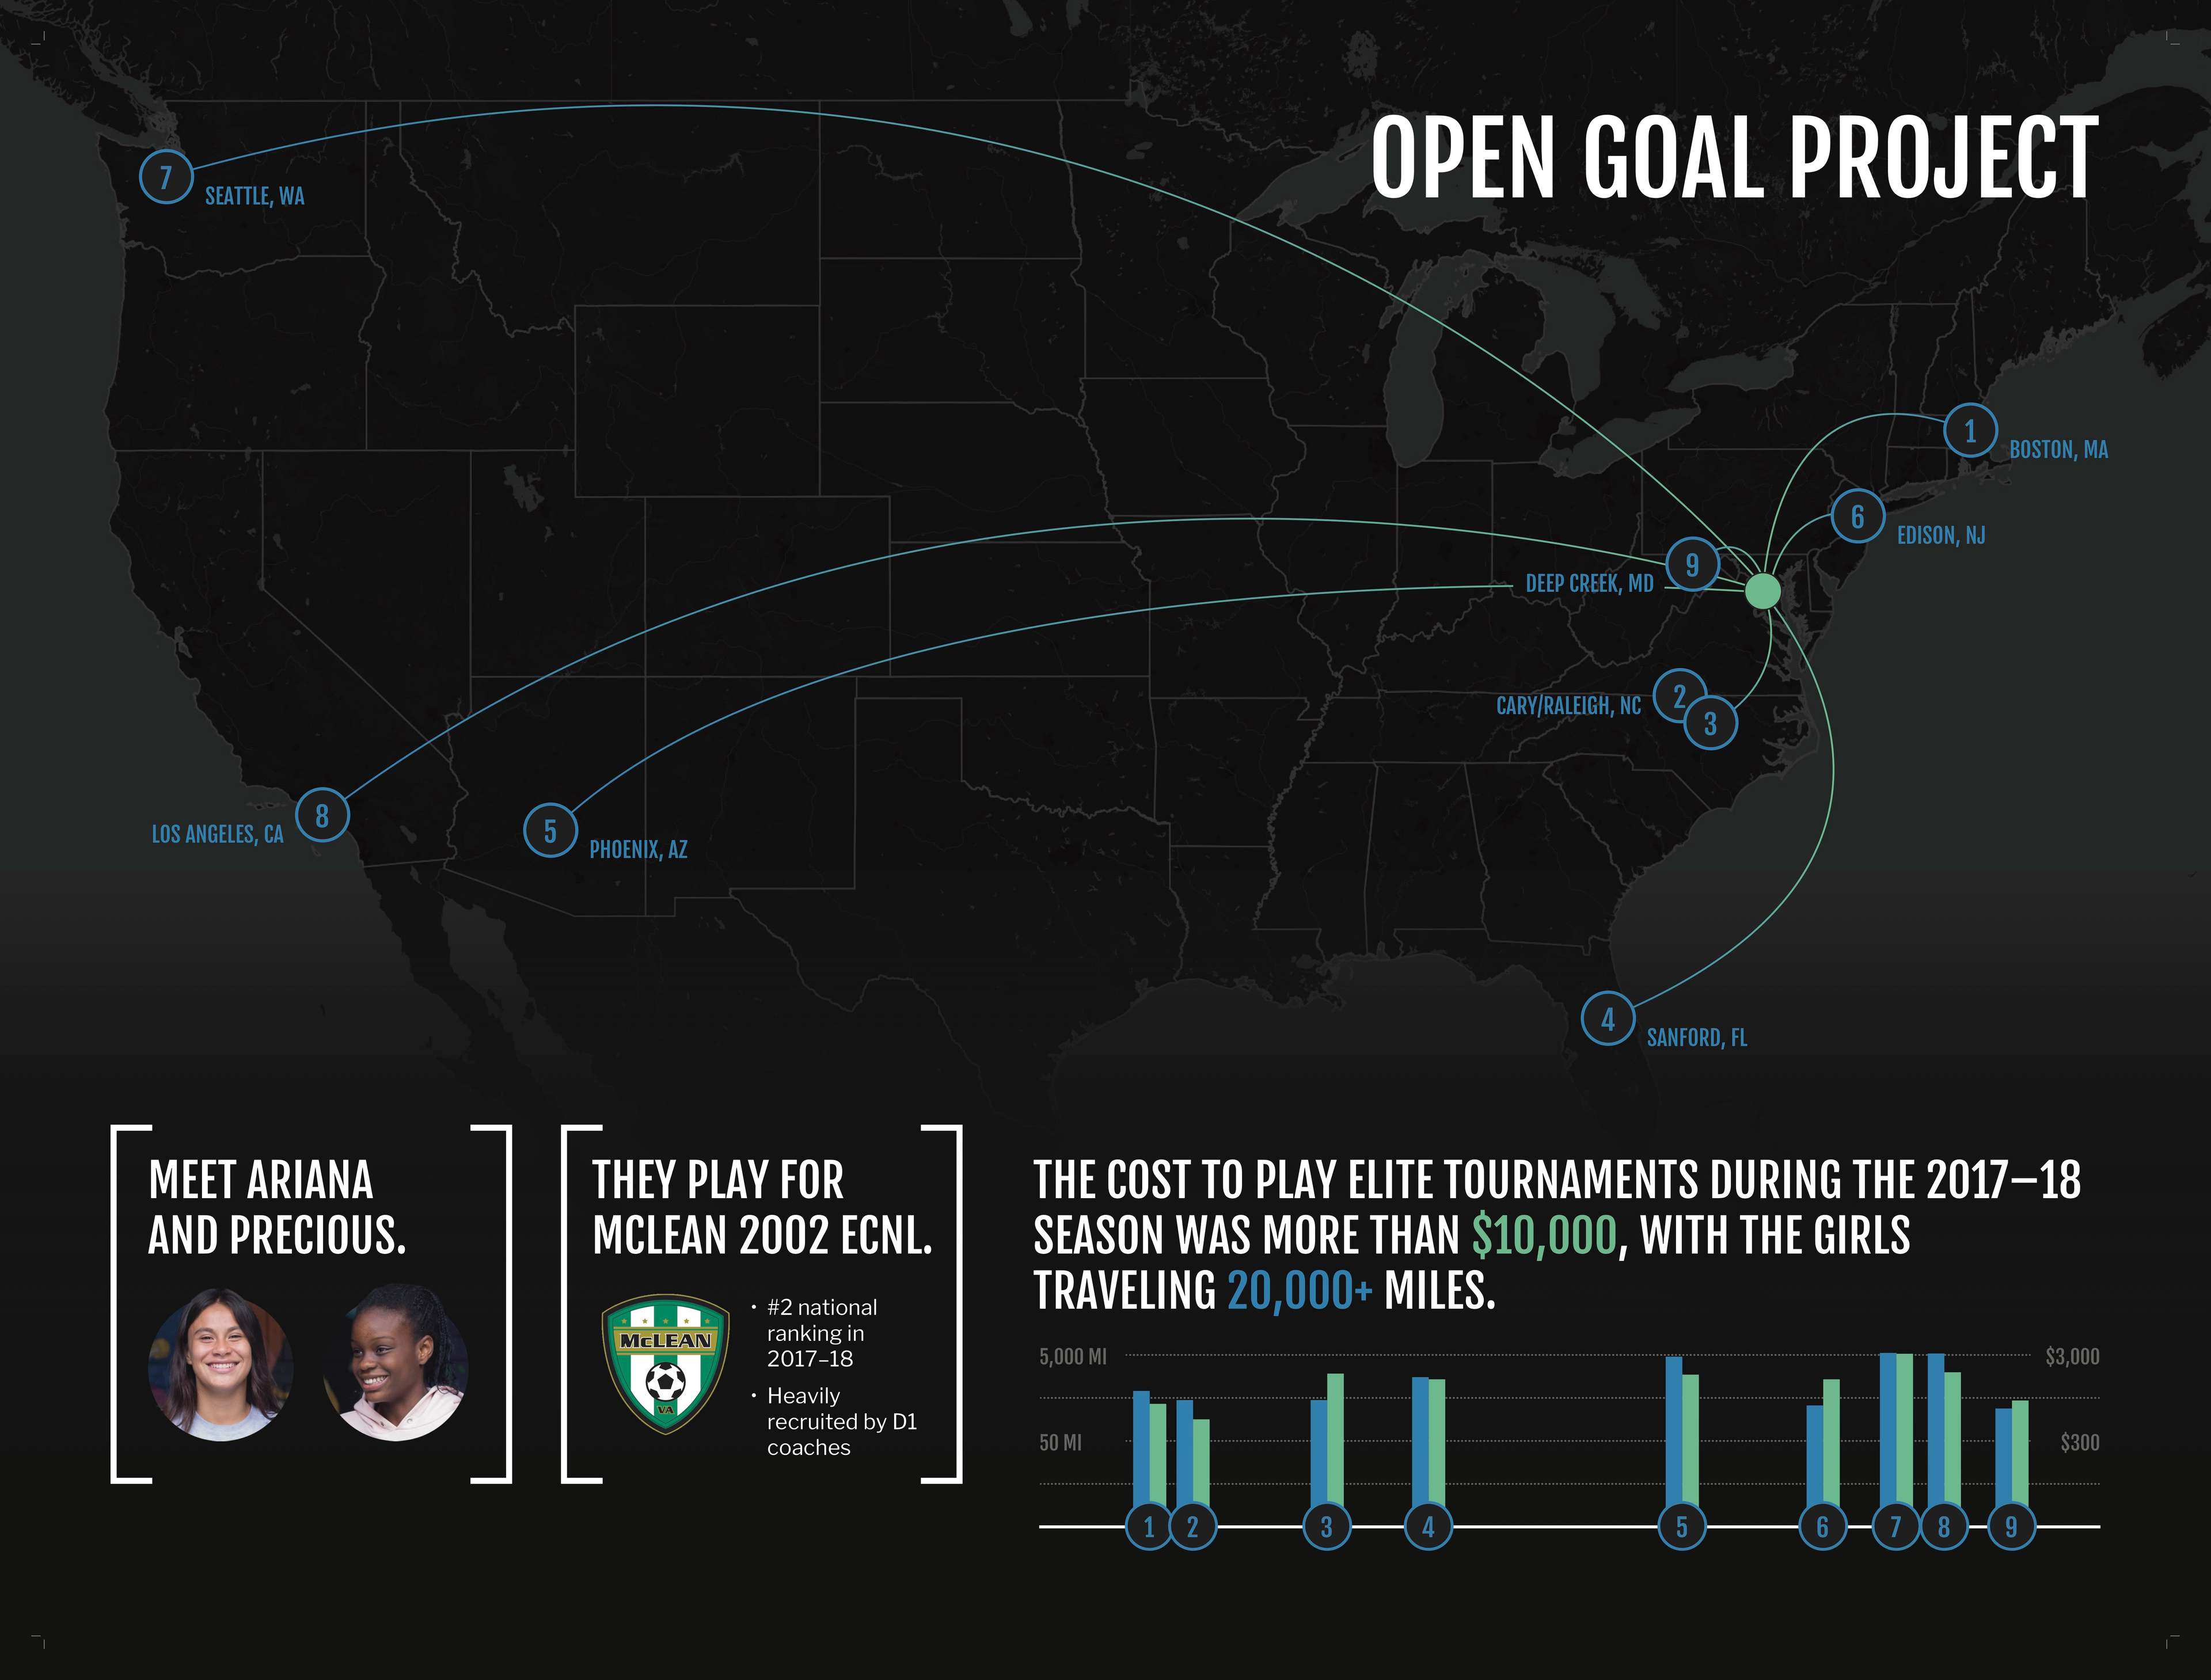 Open Goal Project cost